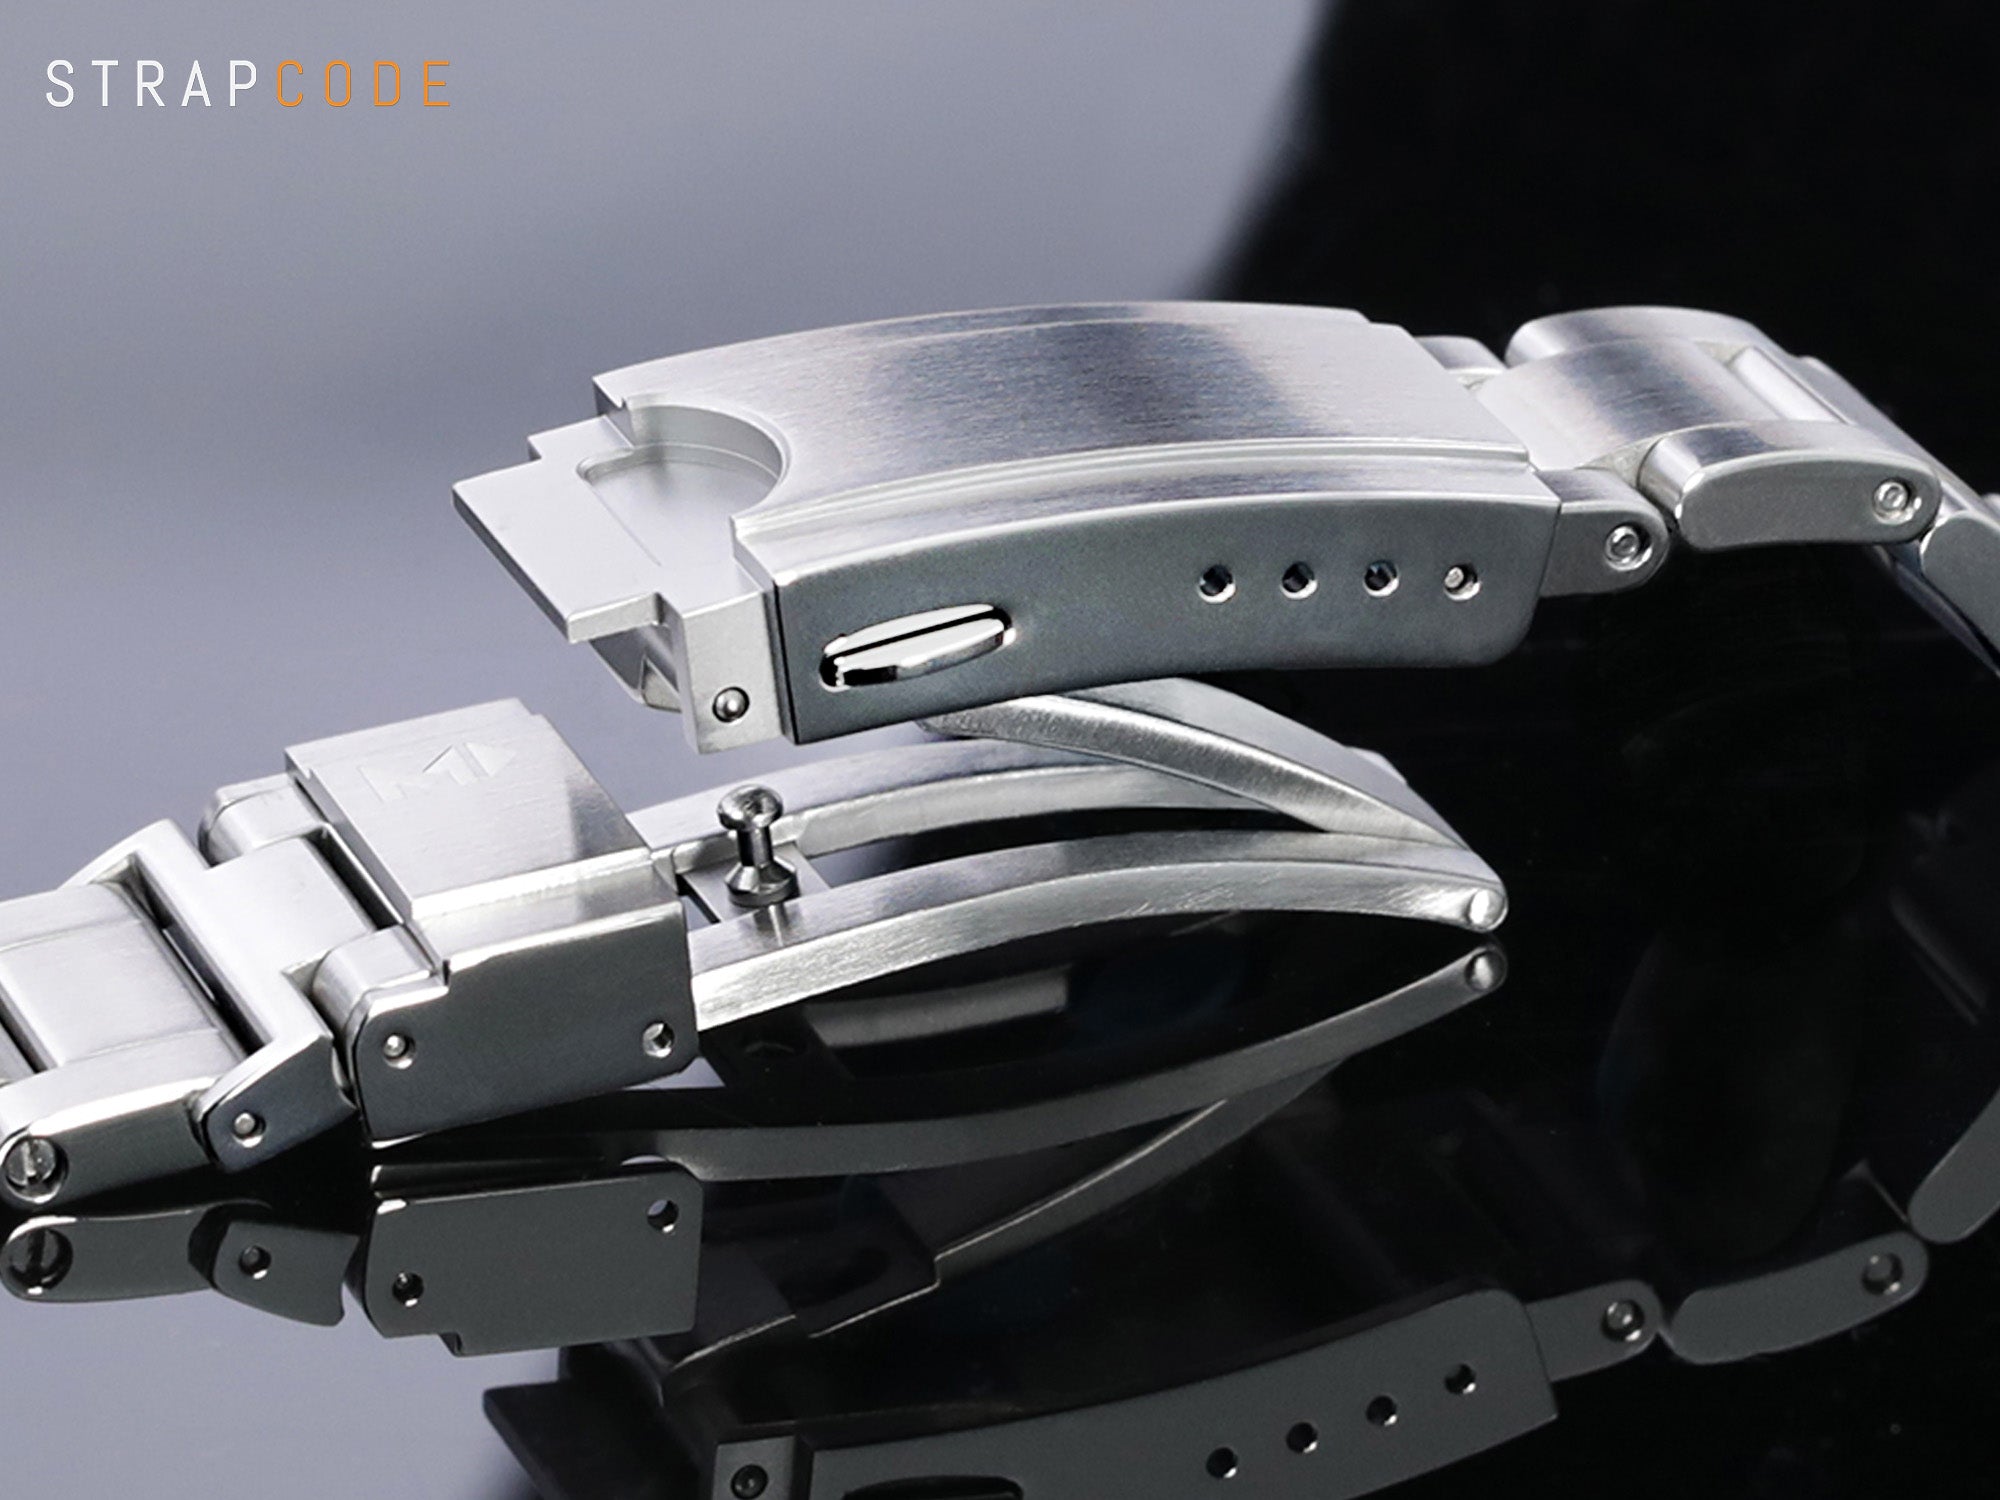 The Flip Clasp / Fold Clasp has an obvious folding structure details by Strapcode watch bands